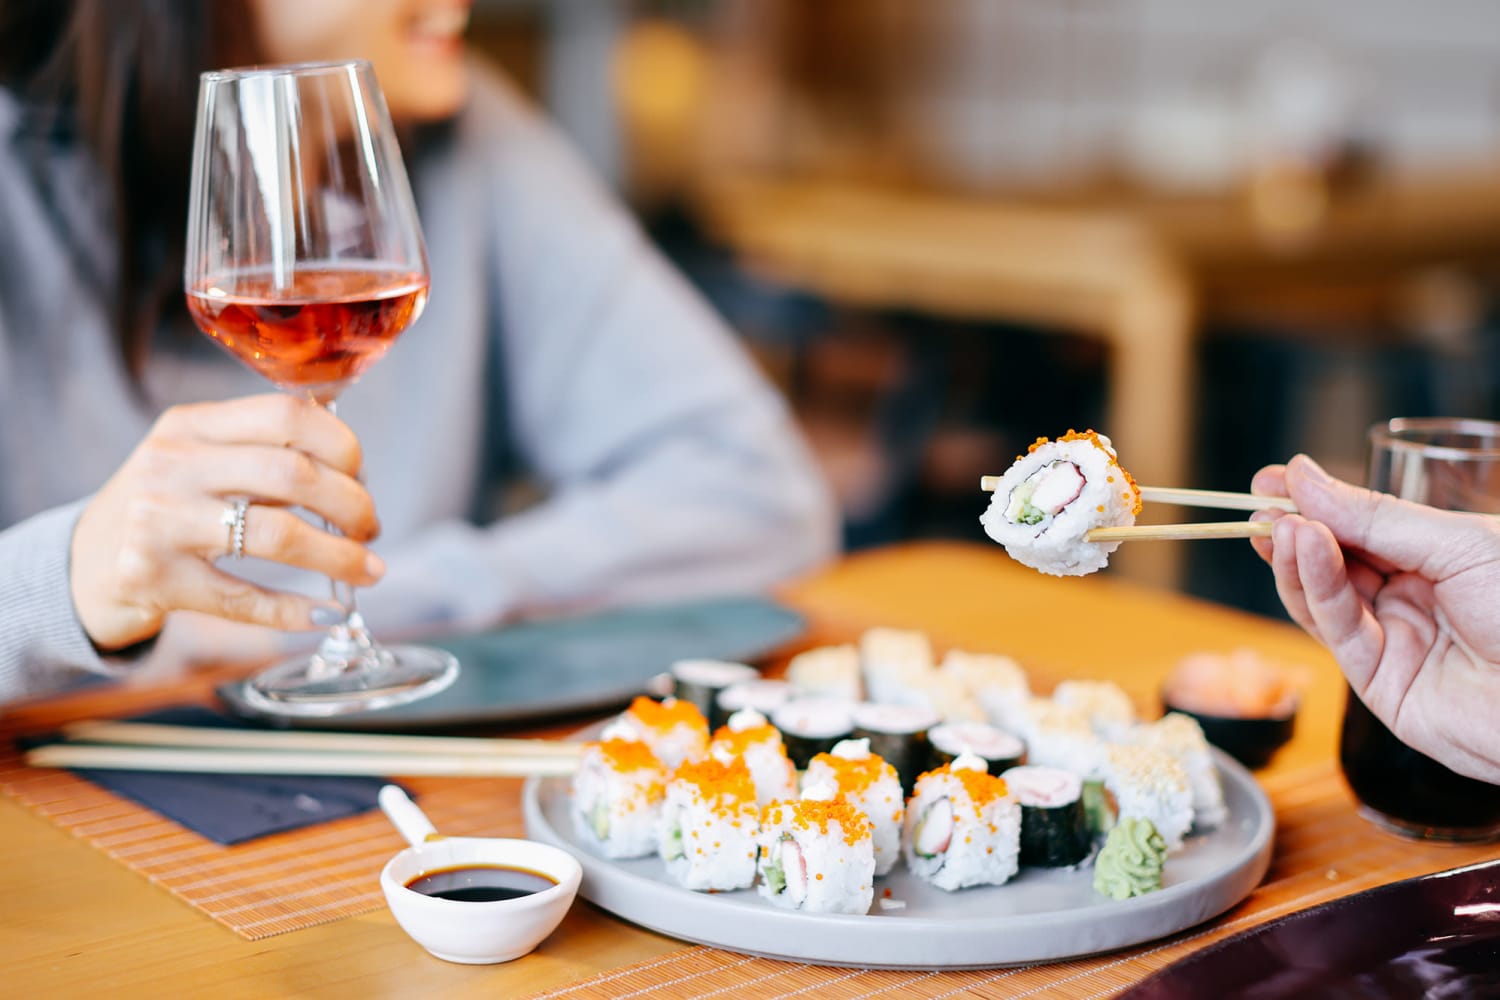 Eating sushi at a restaurant near Pacific West Villas in Westminster, California